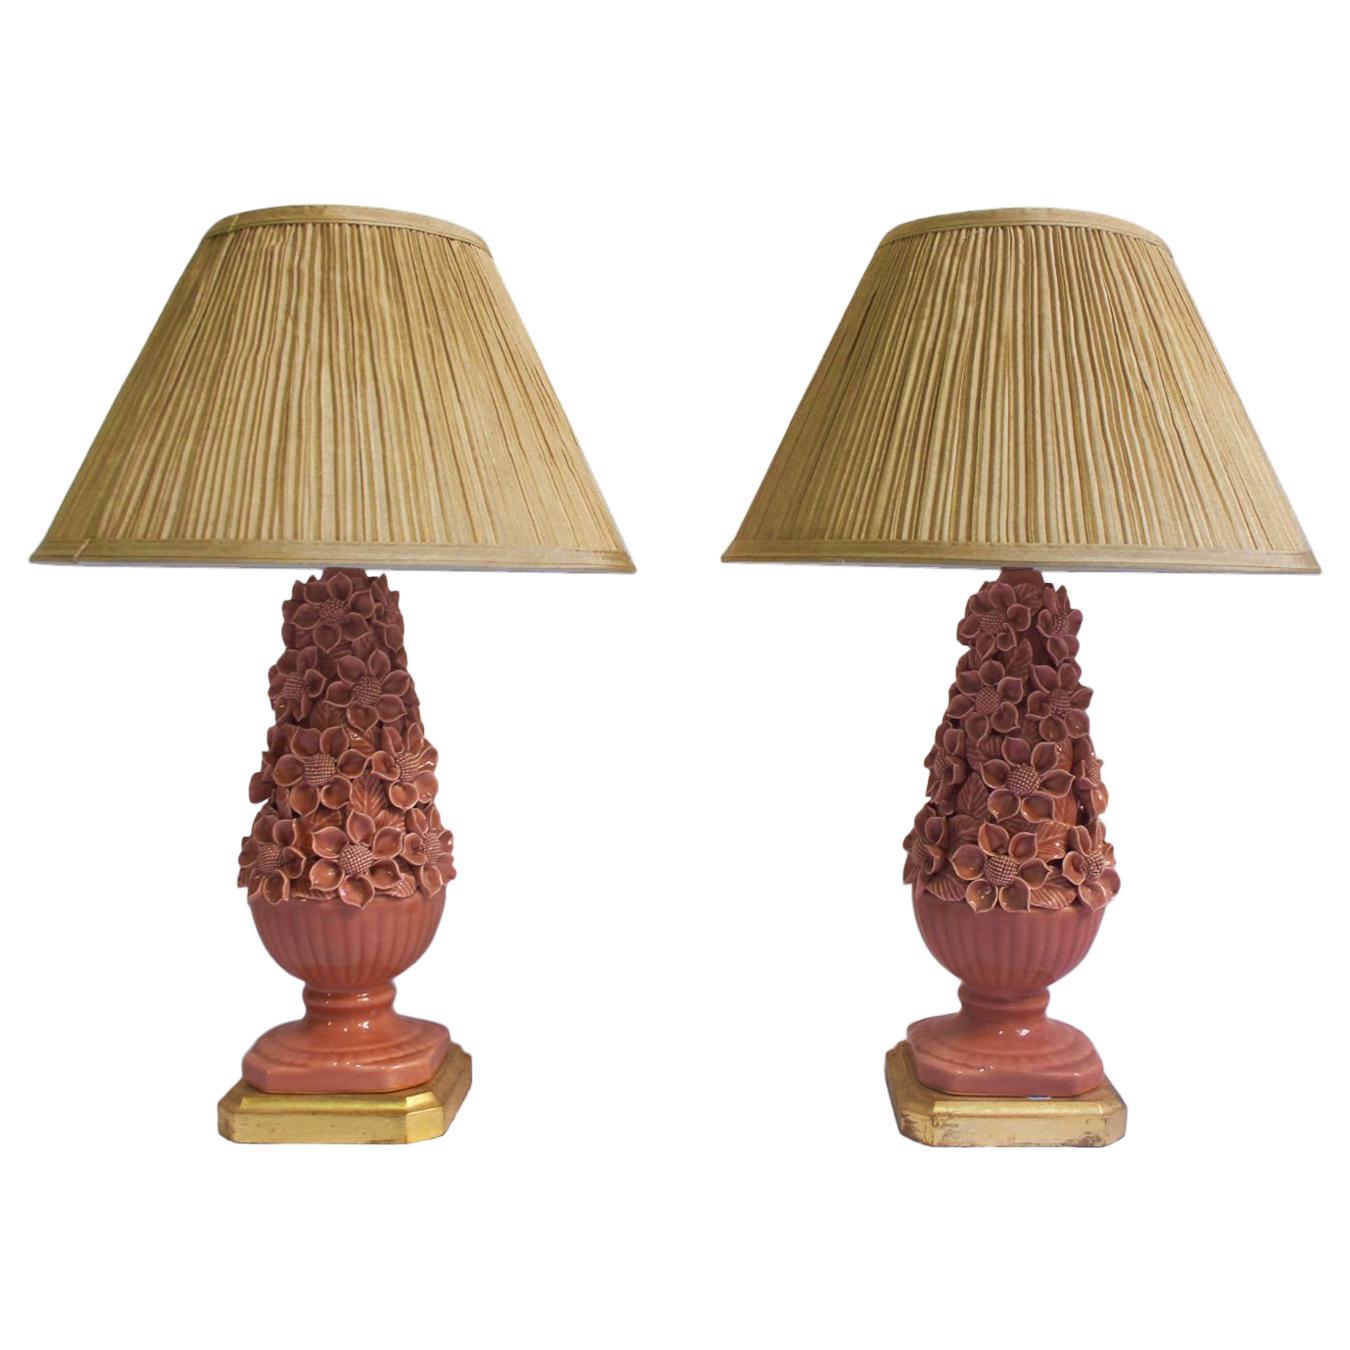 Set of 2 Ceramic Manises Flower Table Lamps in Salmon Color, 1950s im Angebot